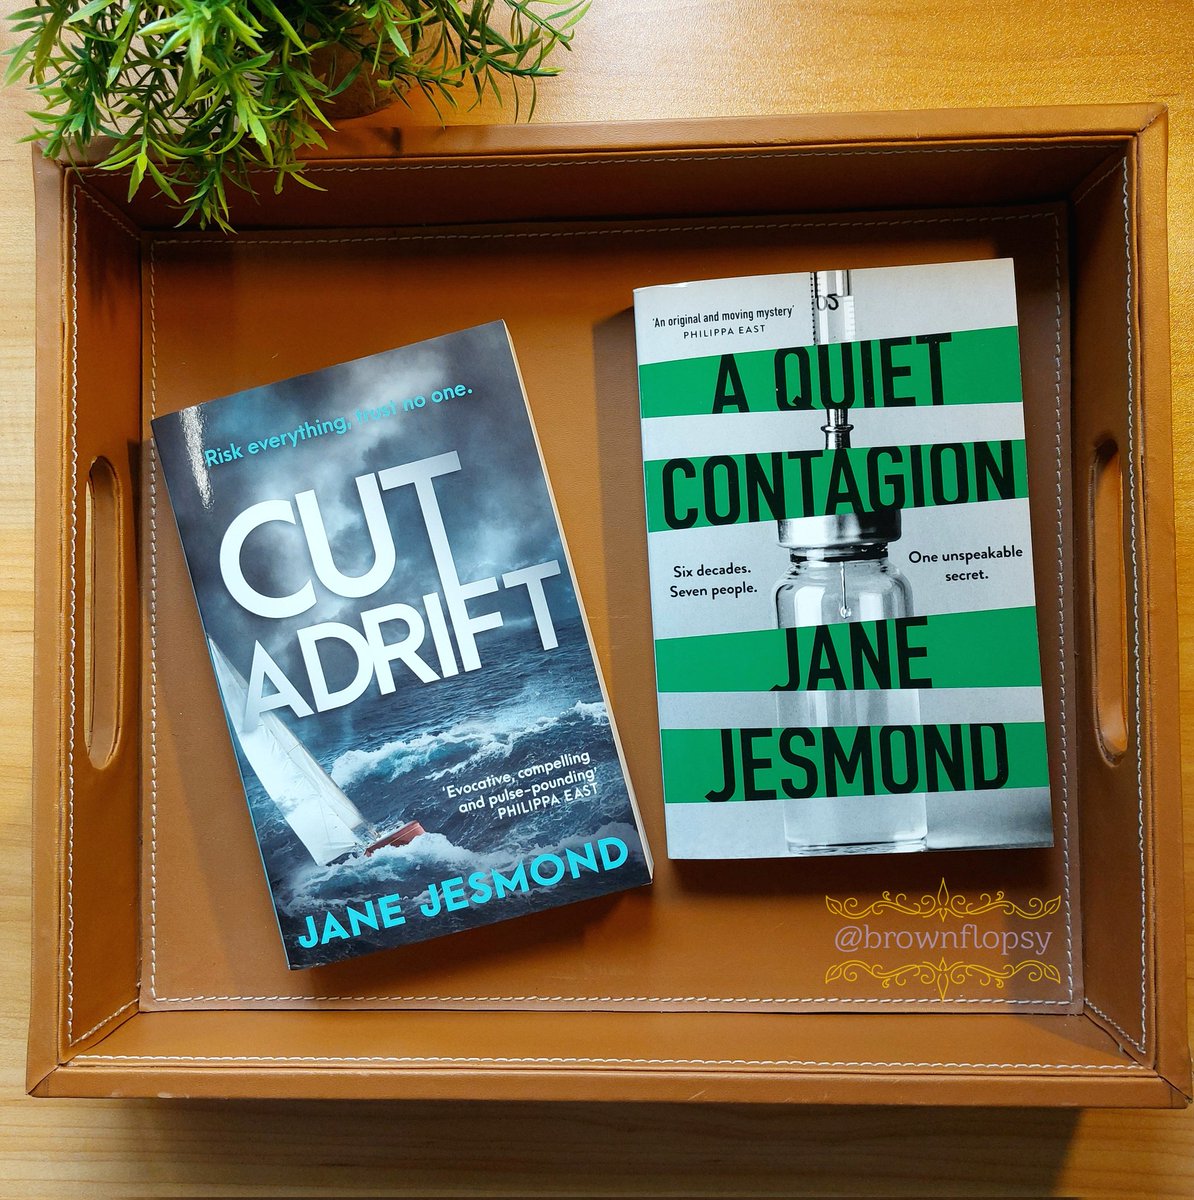 Thank you to @VERVE_Books for very kindly sending me #CutAdrift and #AQuietContagion by @AuthorJJesmond which I cannot wait to read!  
@VERVE_Books are one of my fav indie publishers, and I highly recommend a browse through their briliant catalogue!  vervebooks.co.uk